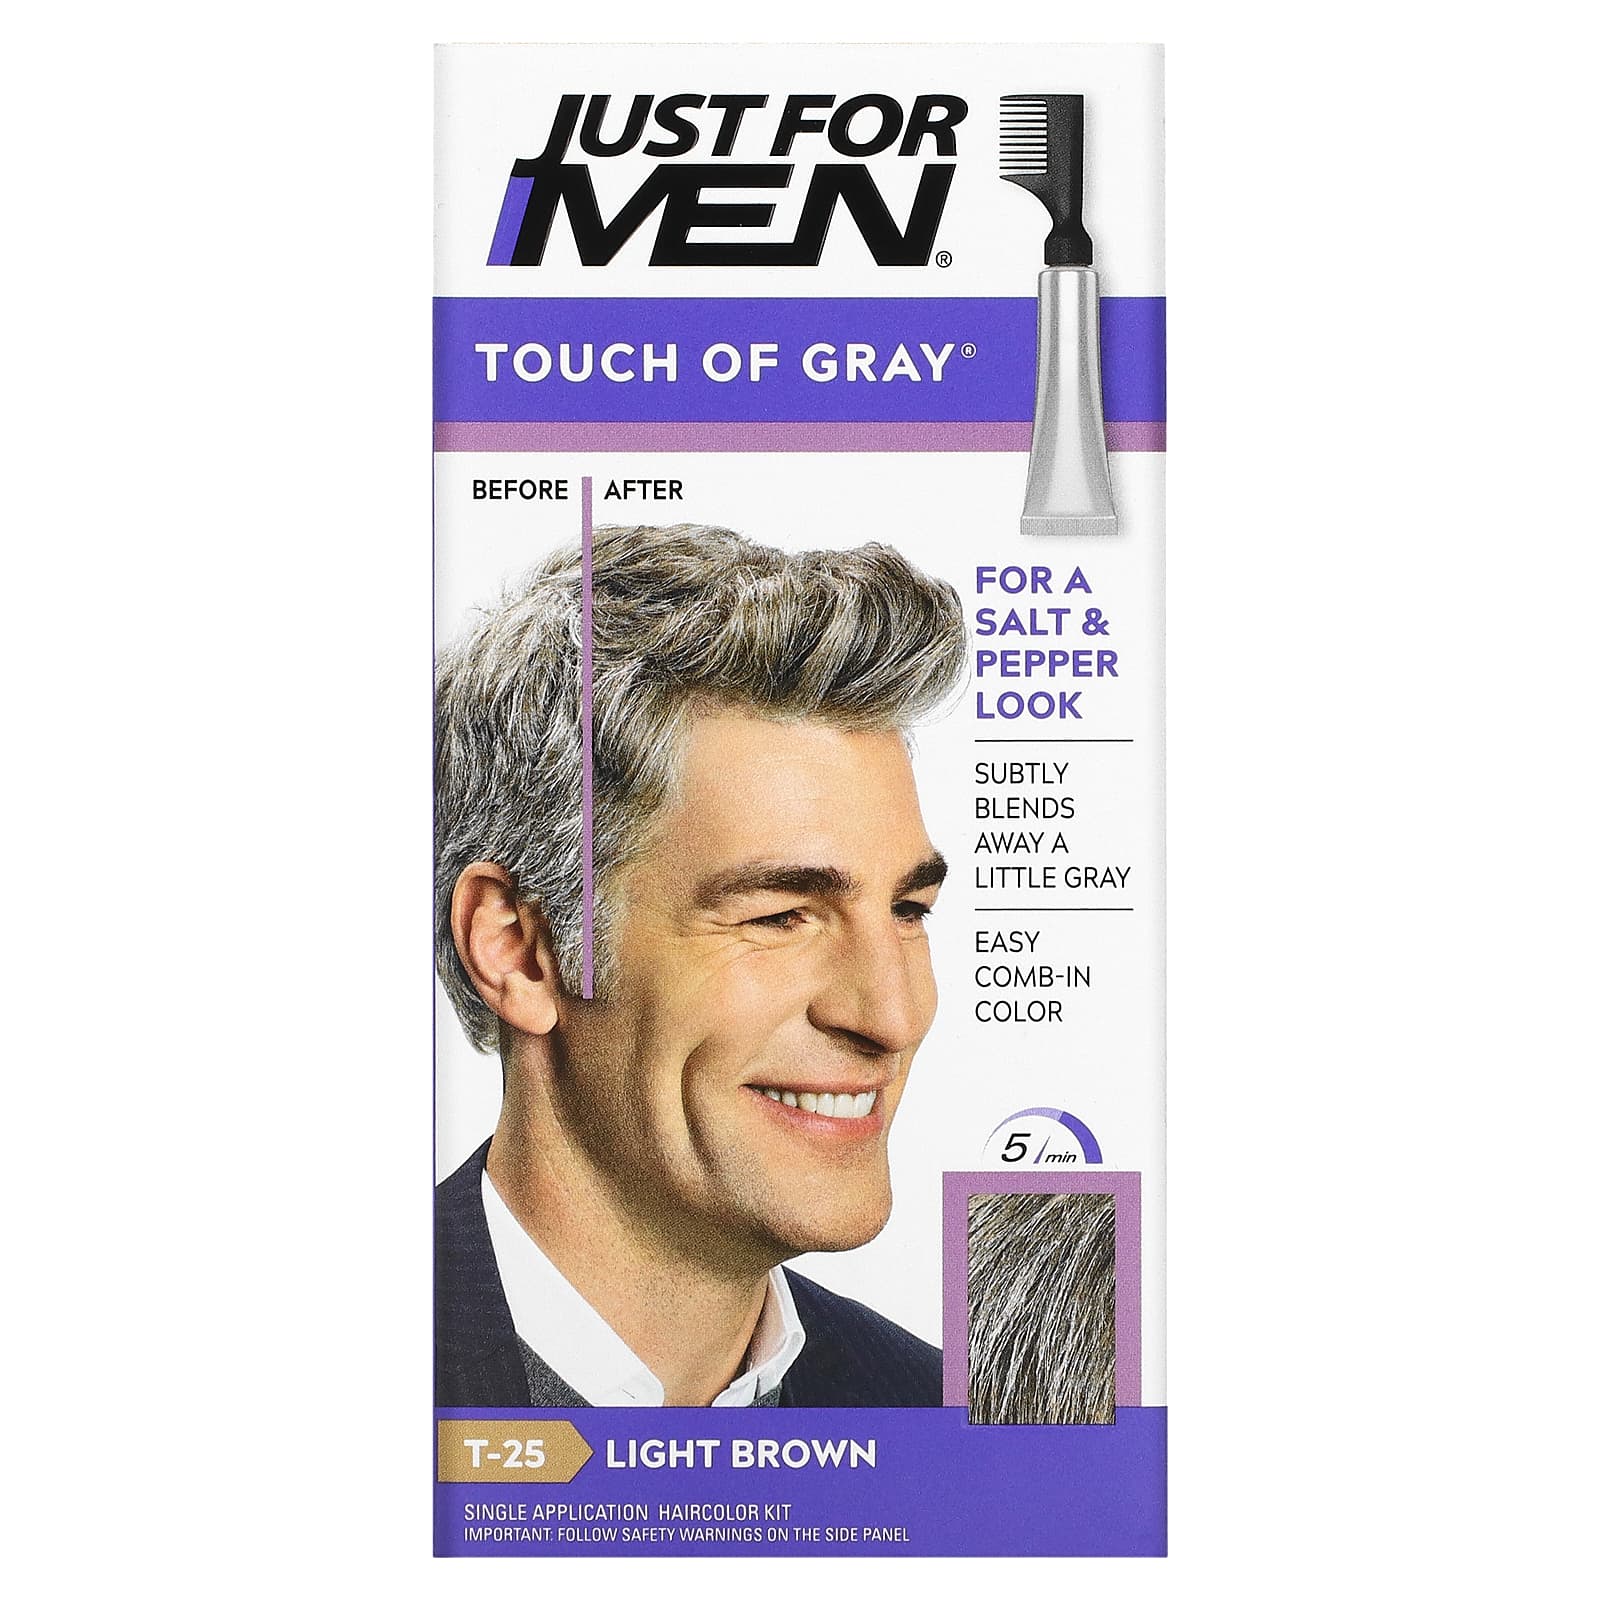 Just for Men, Touch of Gray, Comb-In Hair Color, Light Brown T-25,  oz  (40 g)